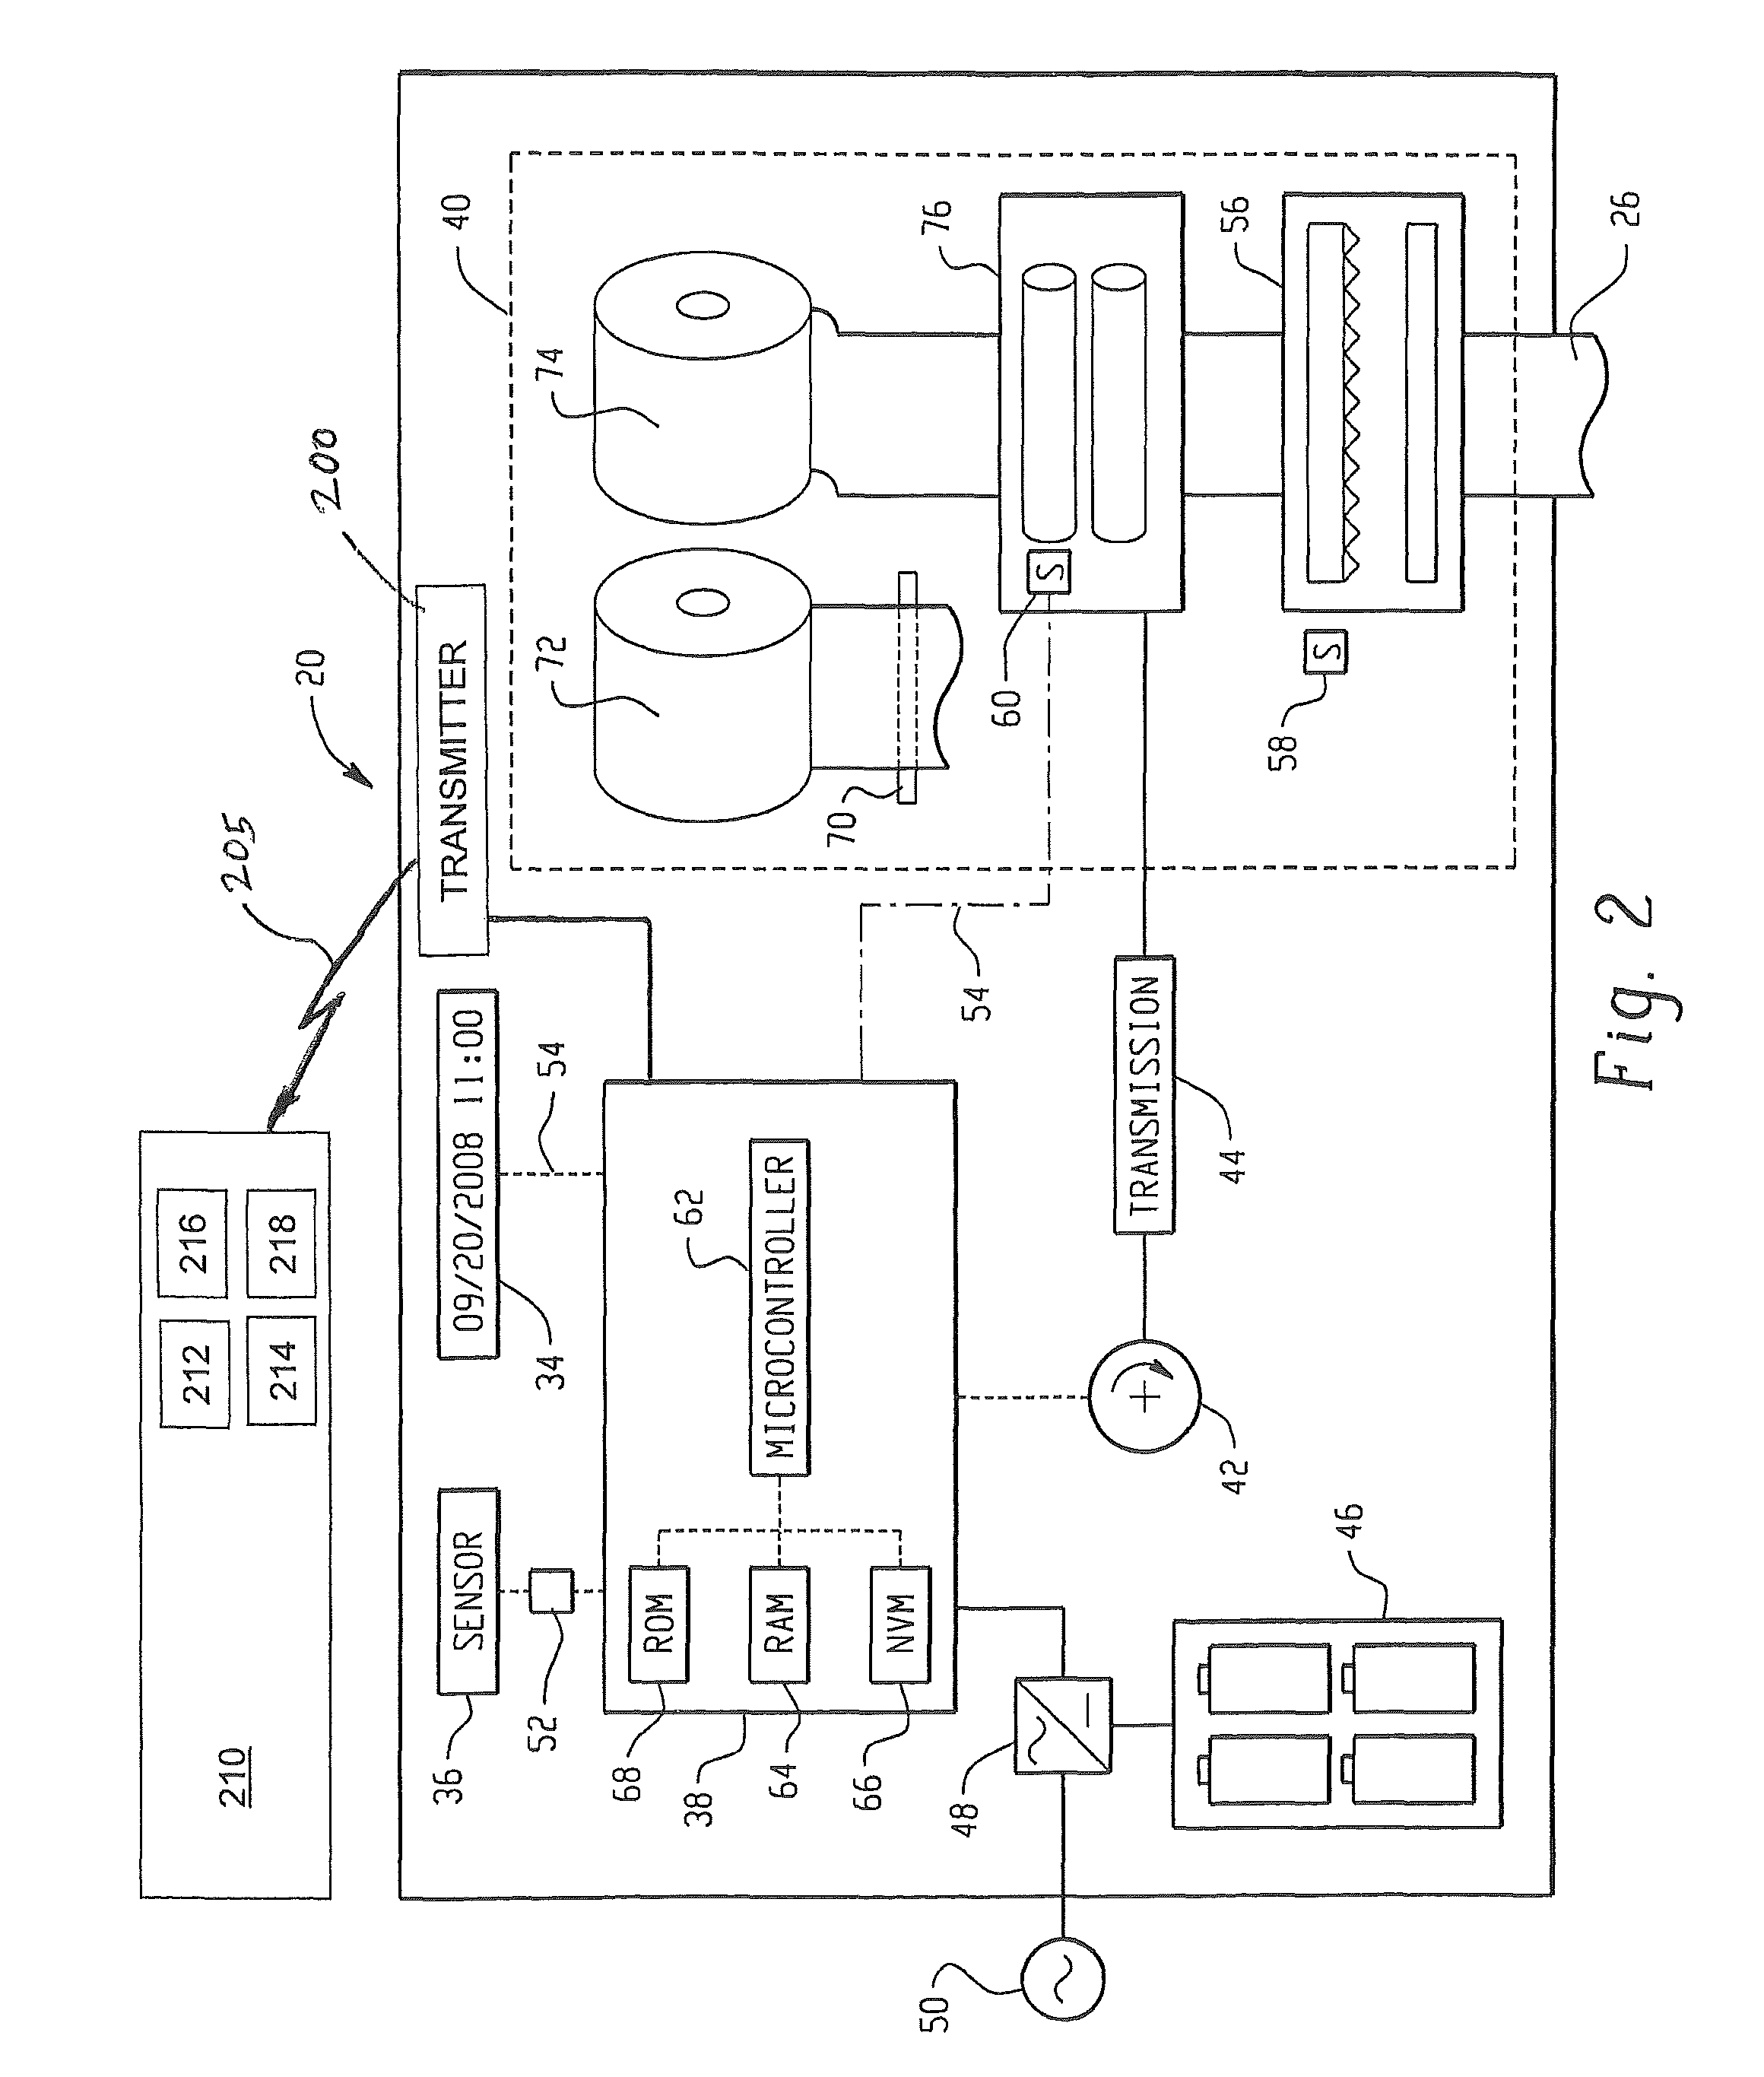 Sheet product dispenser and method of operation